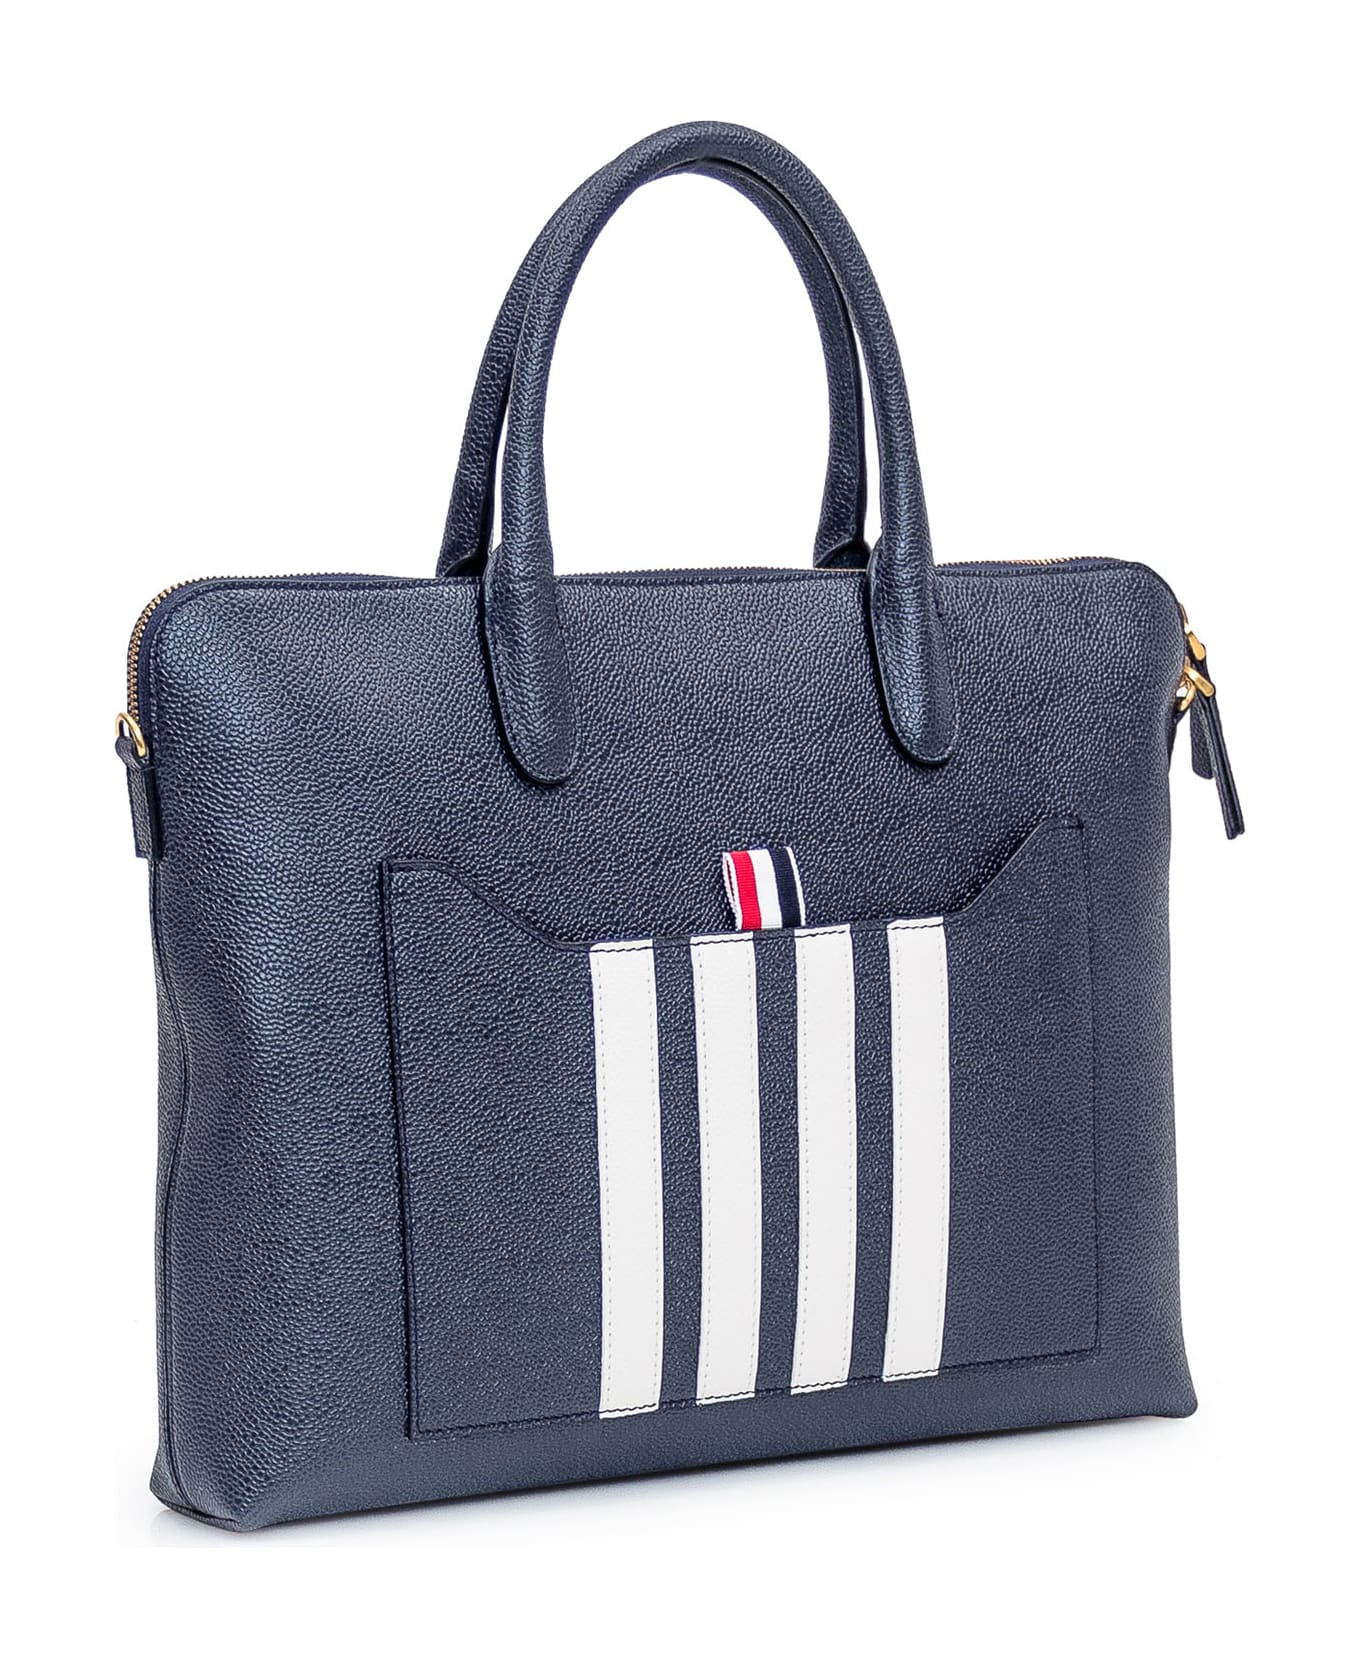 Thom Browne Bag With Logo - NAVY トートバッグ